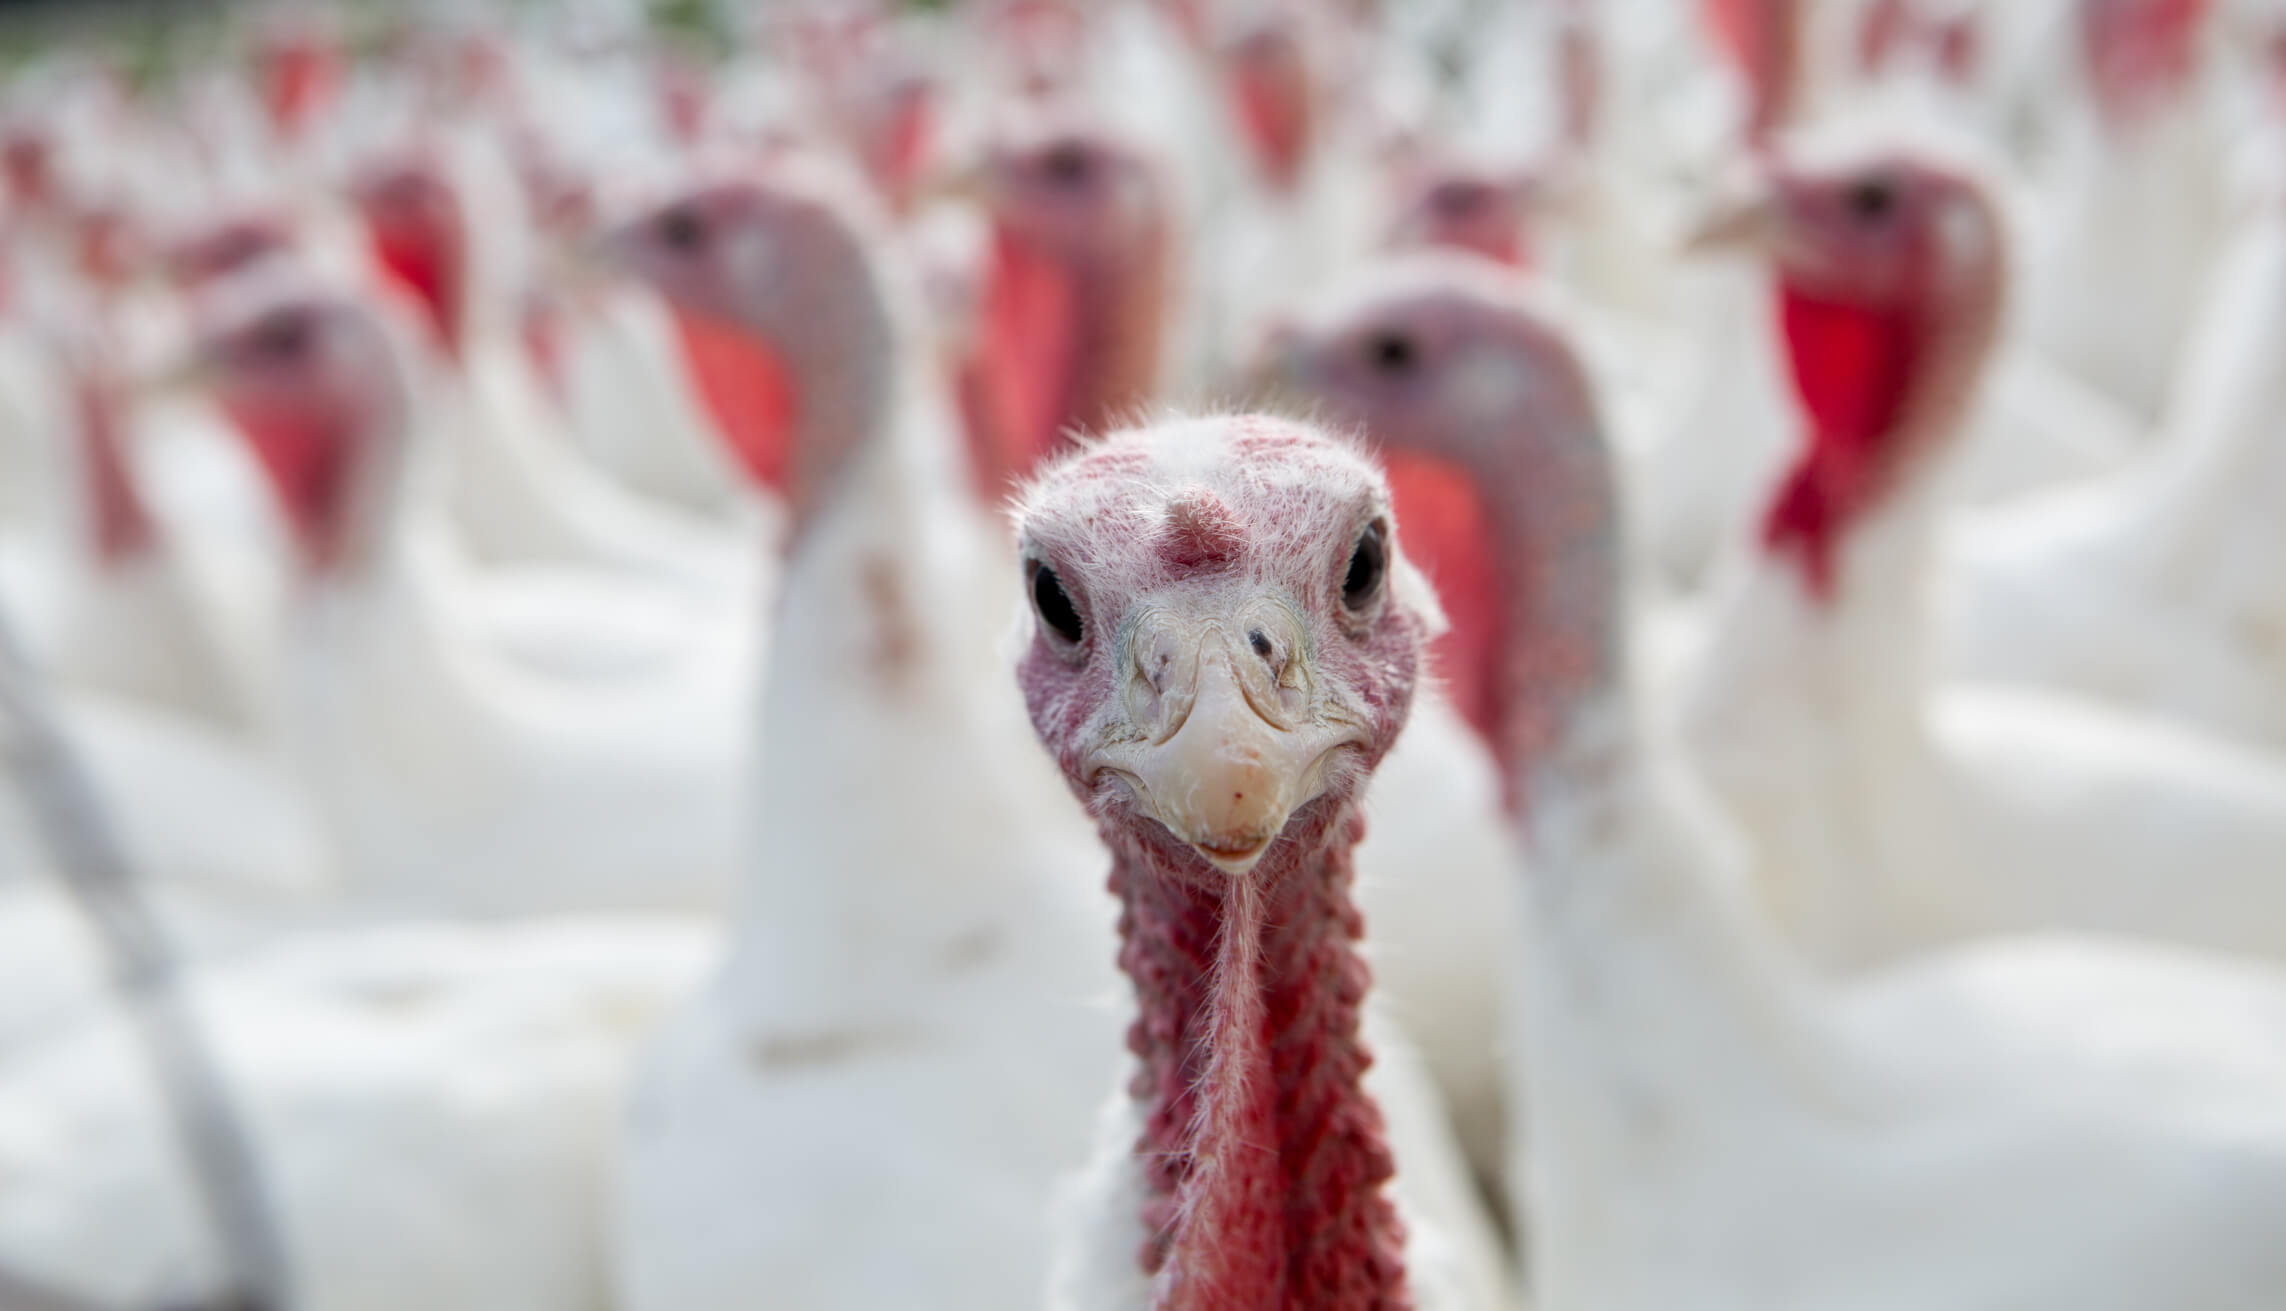 Let’s Talk Turkey About Safety This Thanksgiving